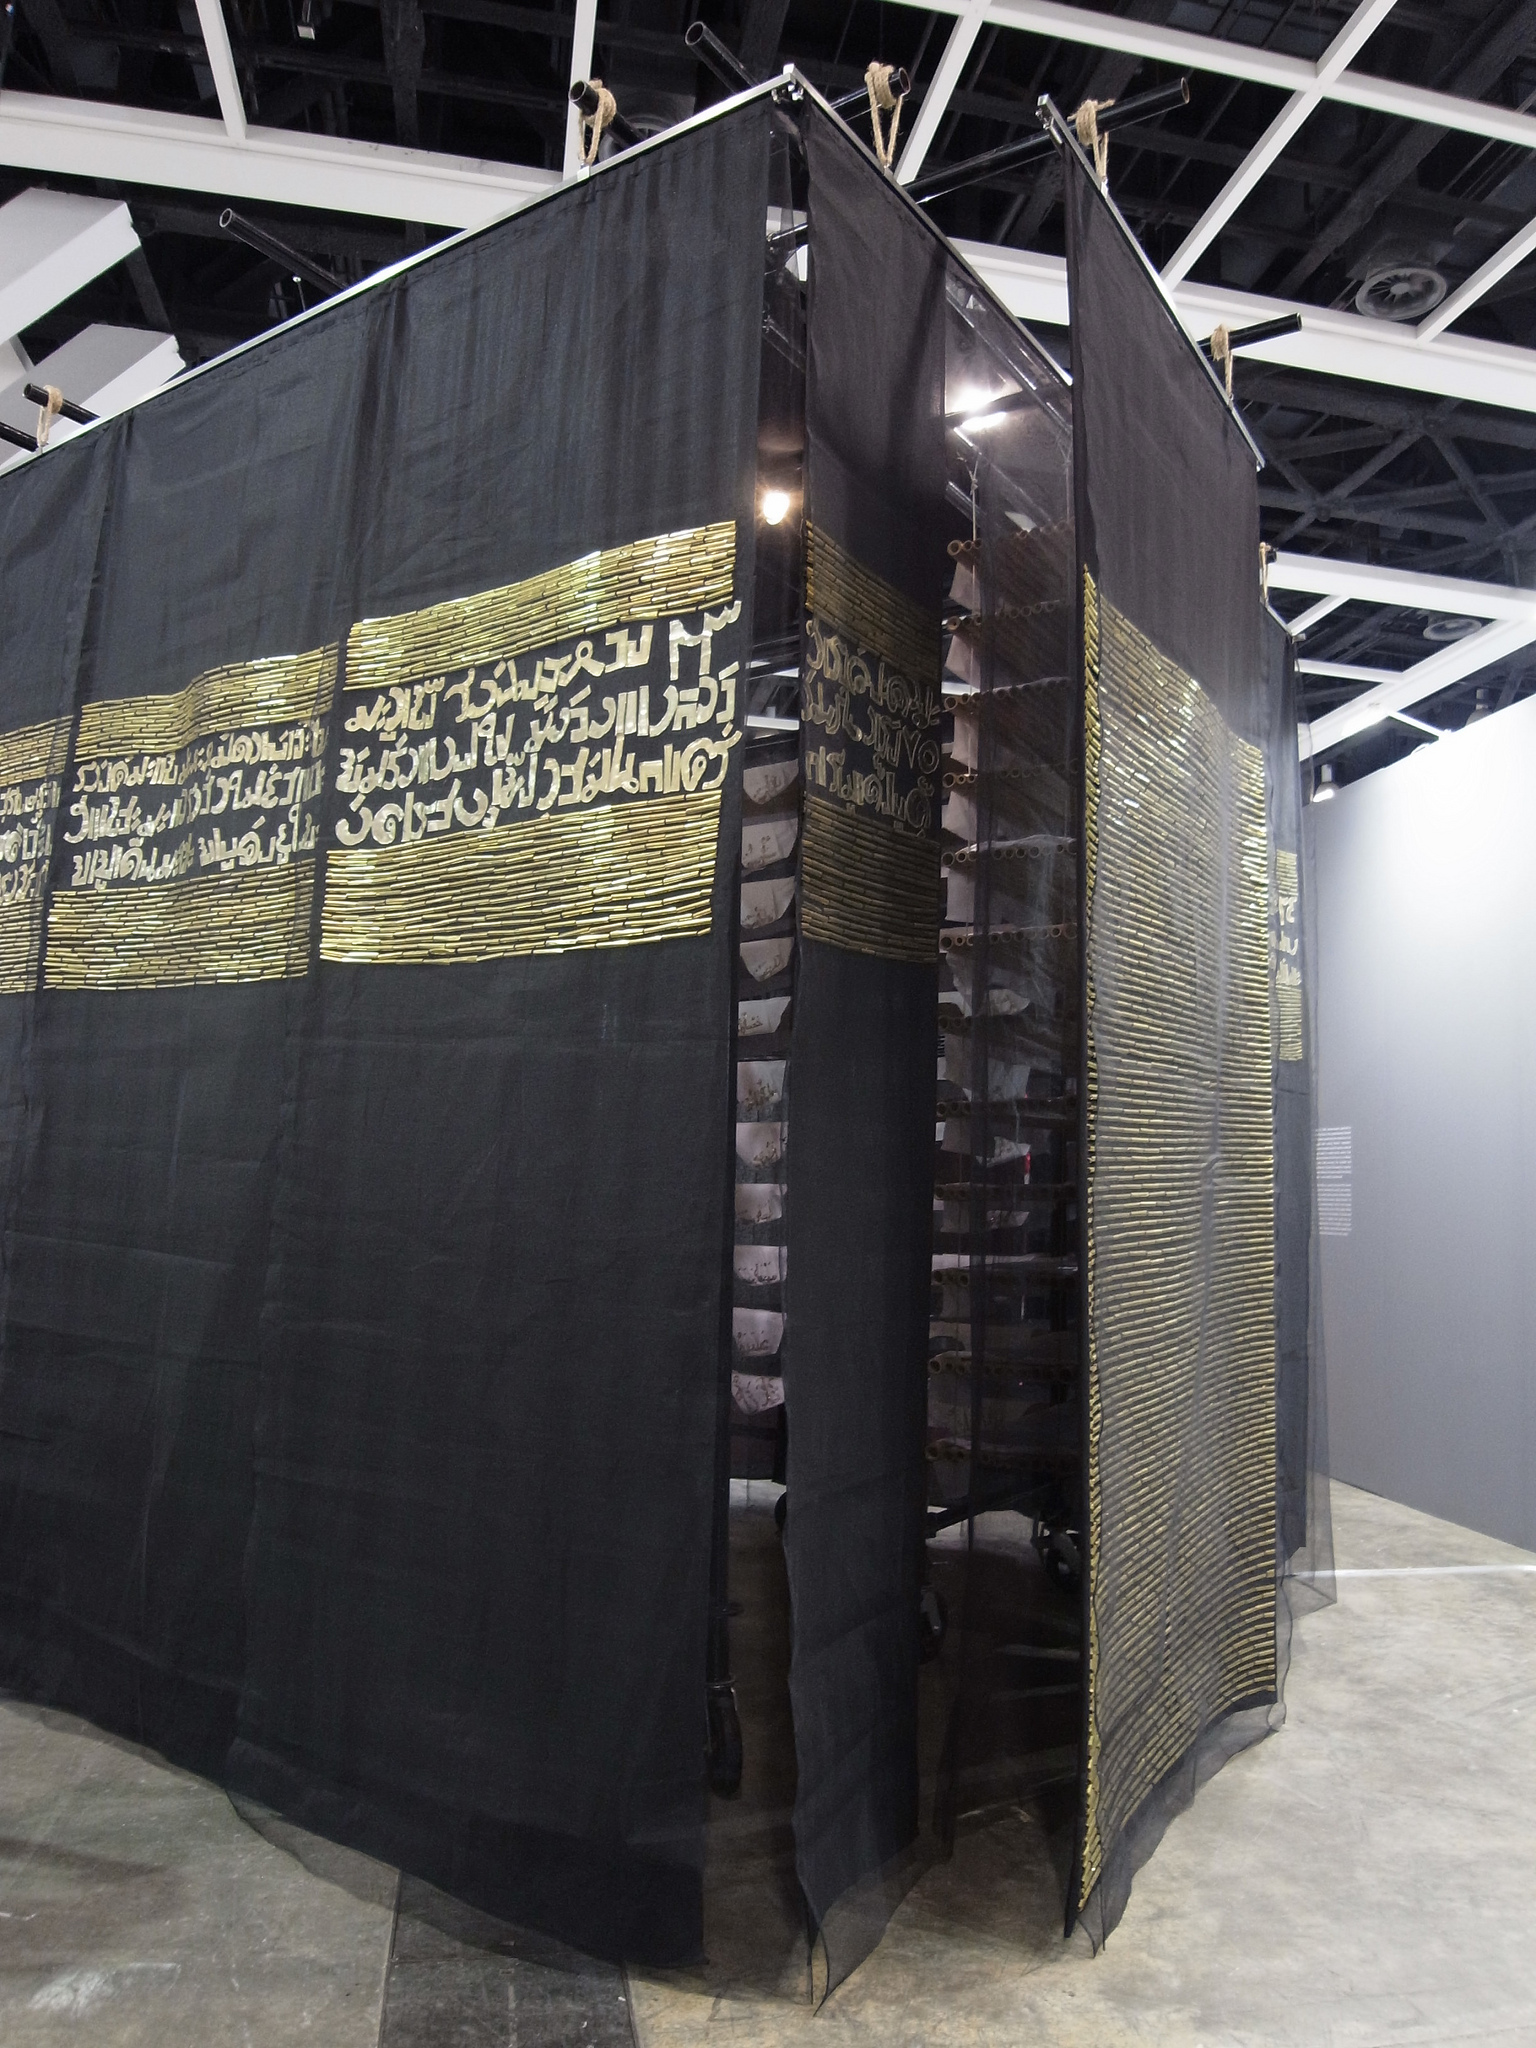  78, 2014, Steel Scaffolding, Bamboo, Fabric, Embroidery, Courtesy of the Artist. 350 x 350 x 350 cm 